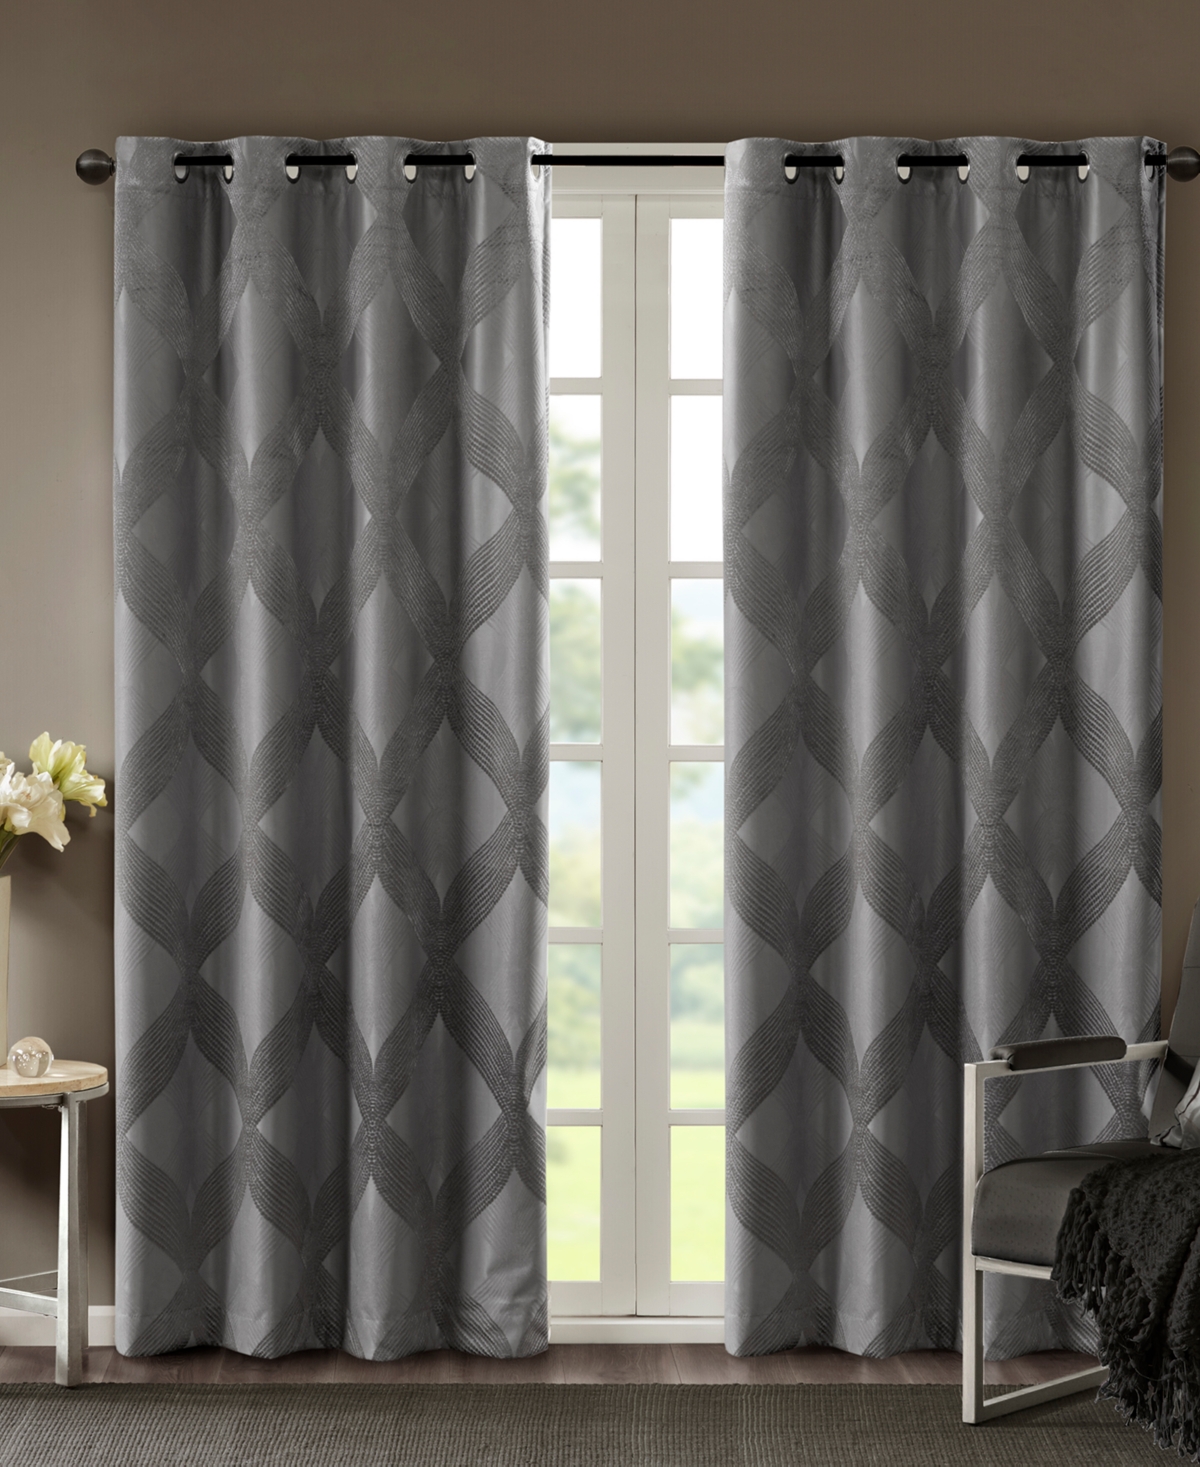 Bentley Ogee Knitted Jacquard Total Blackout Curtain Panel, 50"W x 95"L - Charcoal